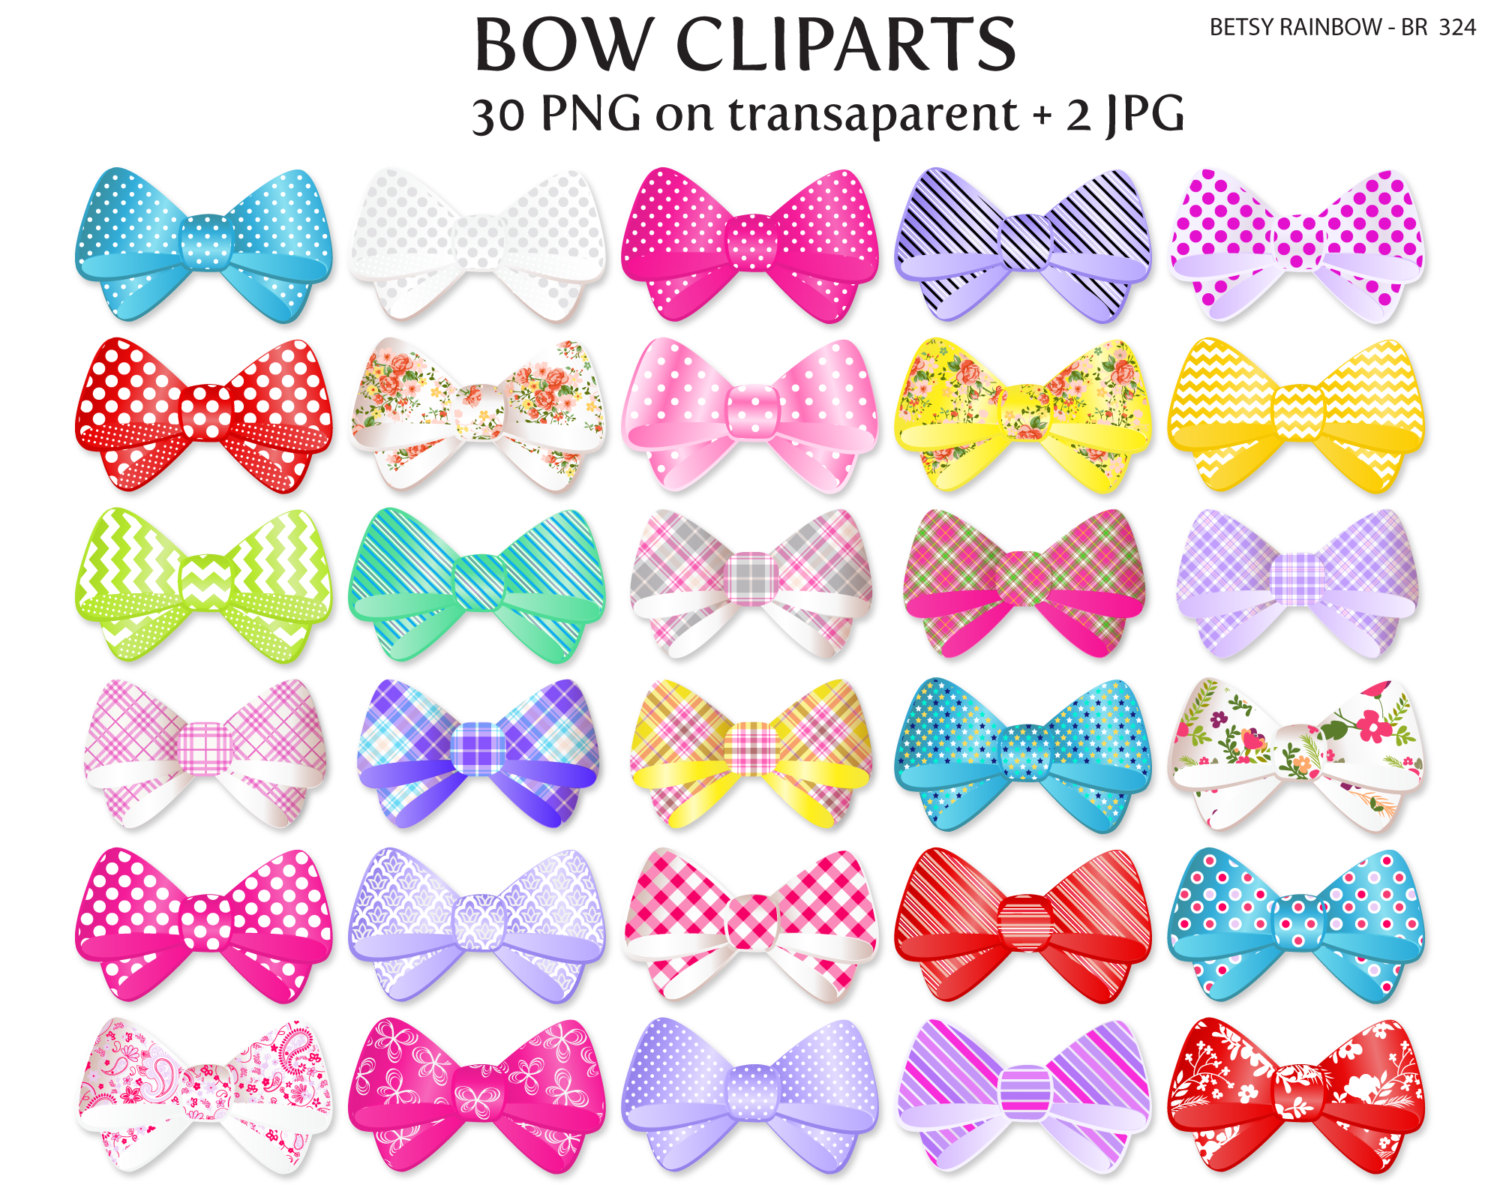 Bow cliparts PNG and JPG, bow clipart, girl, ribbon - BR 324